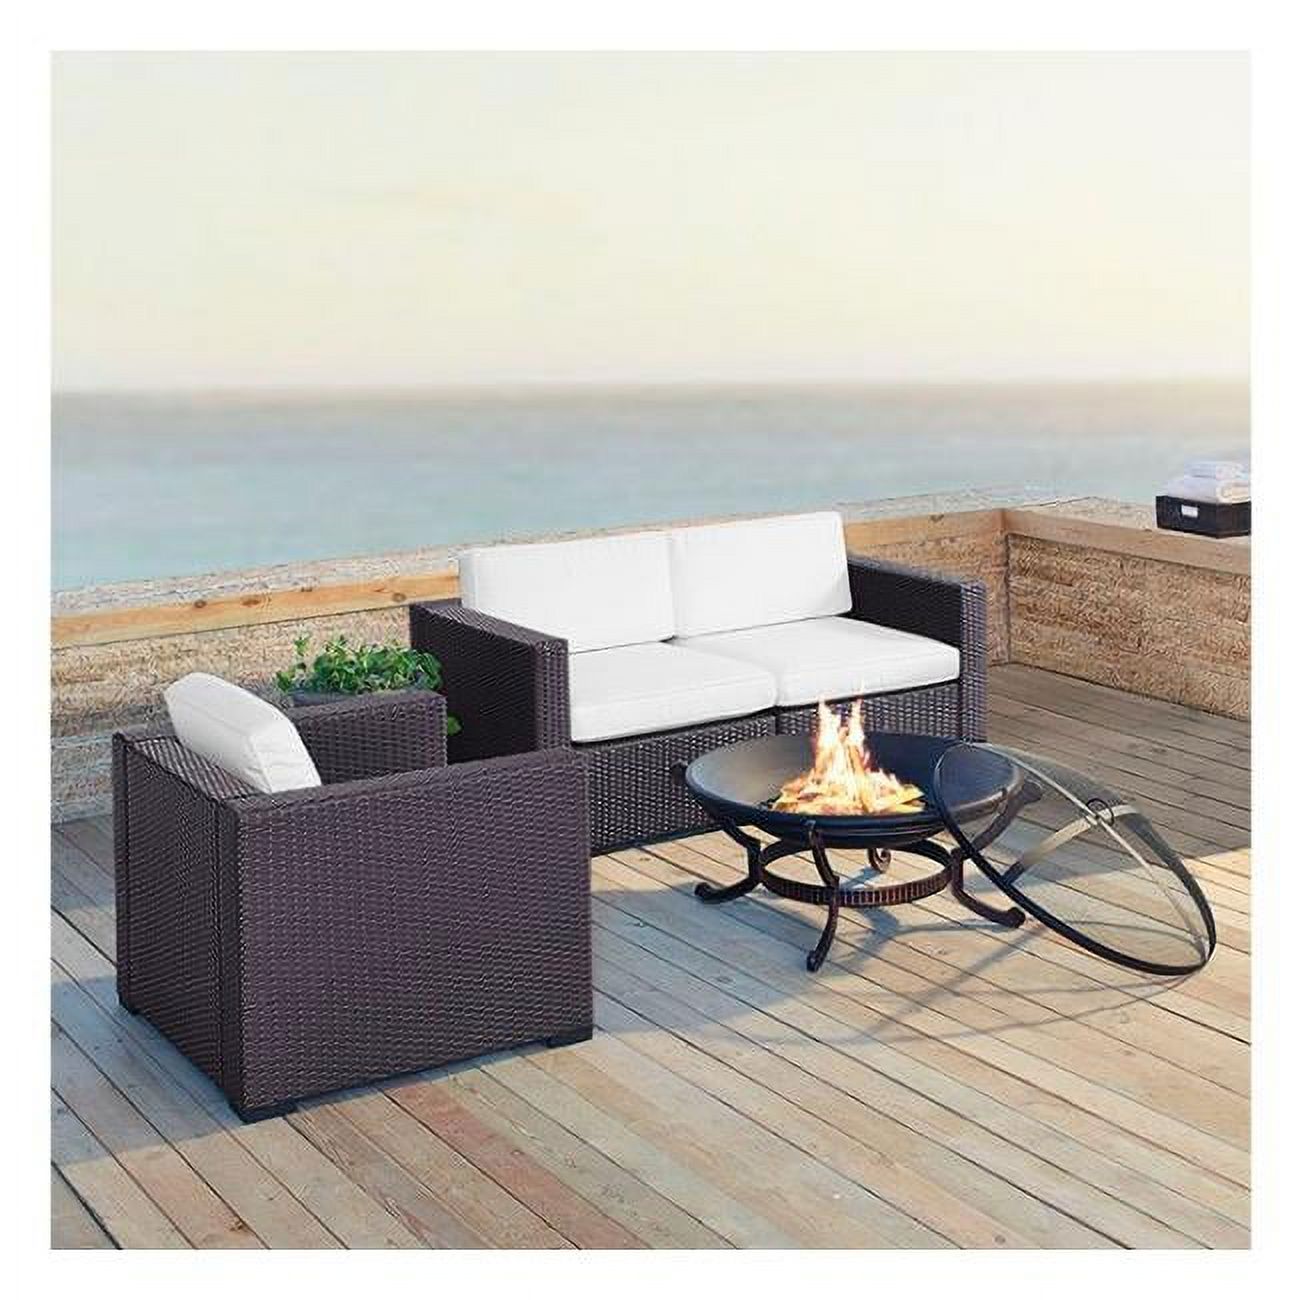 Crosley Biscayne 4 Piece Wicker Patio Fire Pit Sofa Set in Brown and White - image 1 of 4